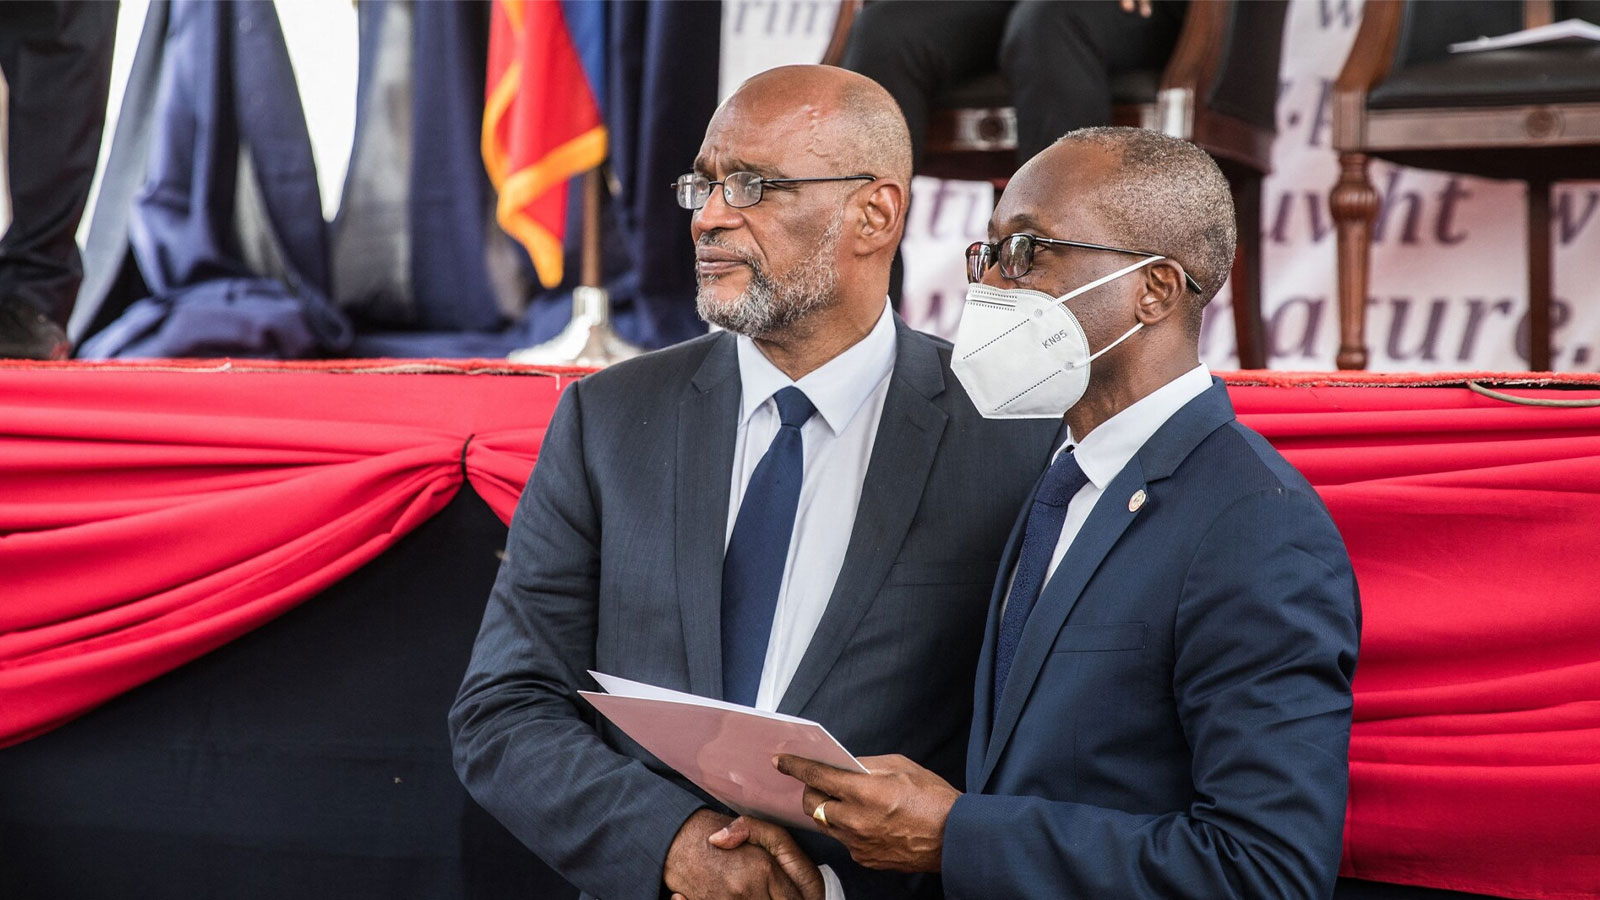 Haitian Prime Minister Ariel Henry resigns; transitional council sworn in